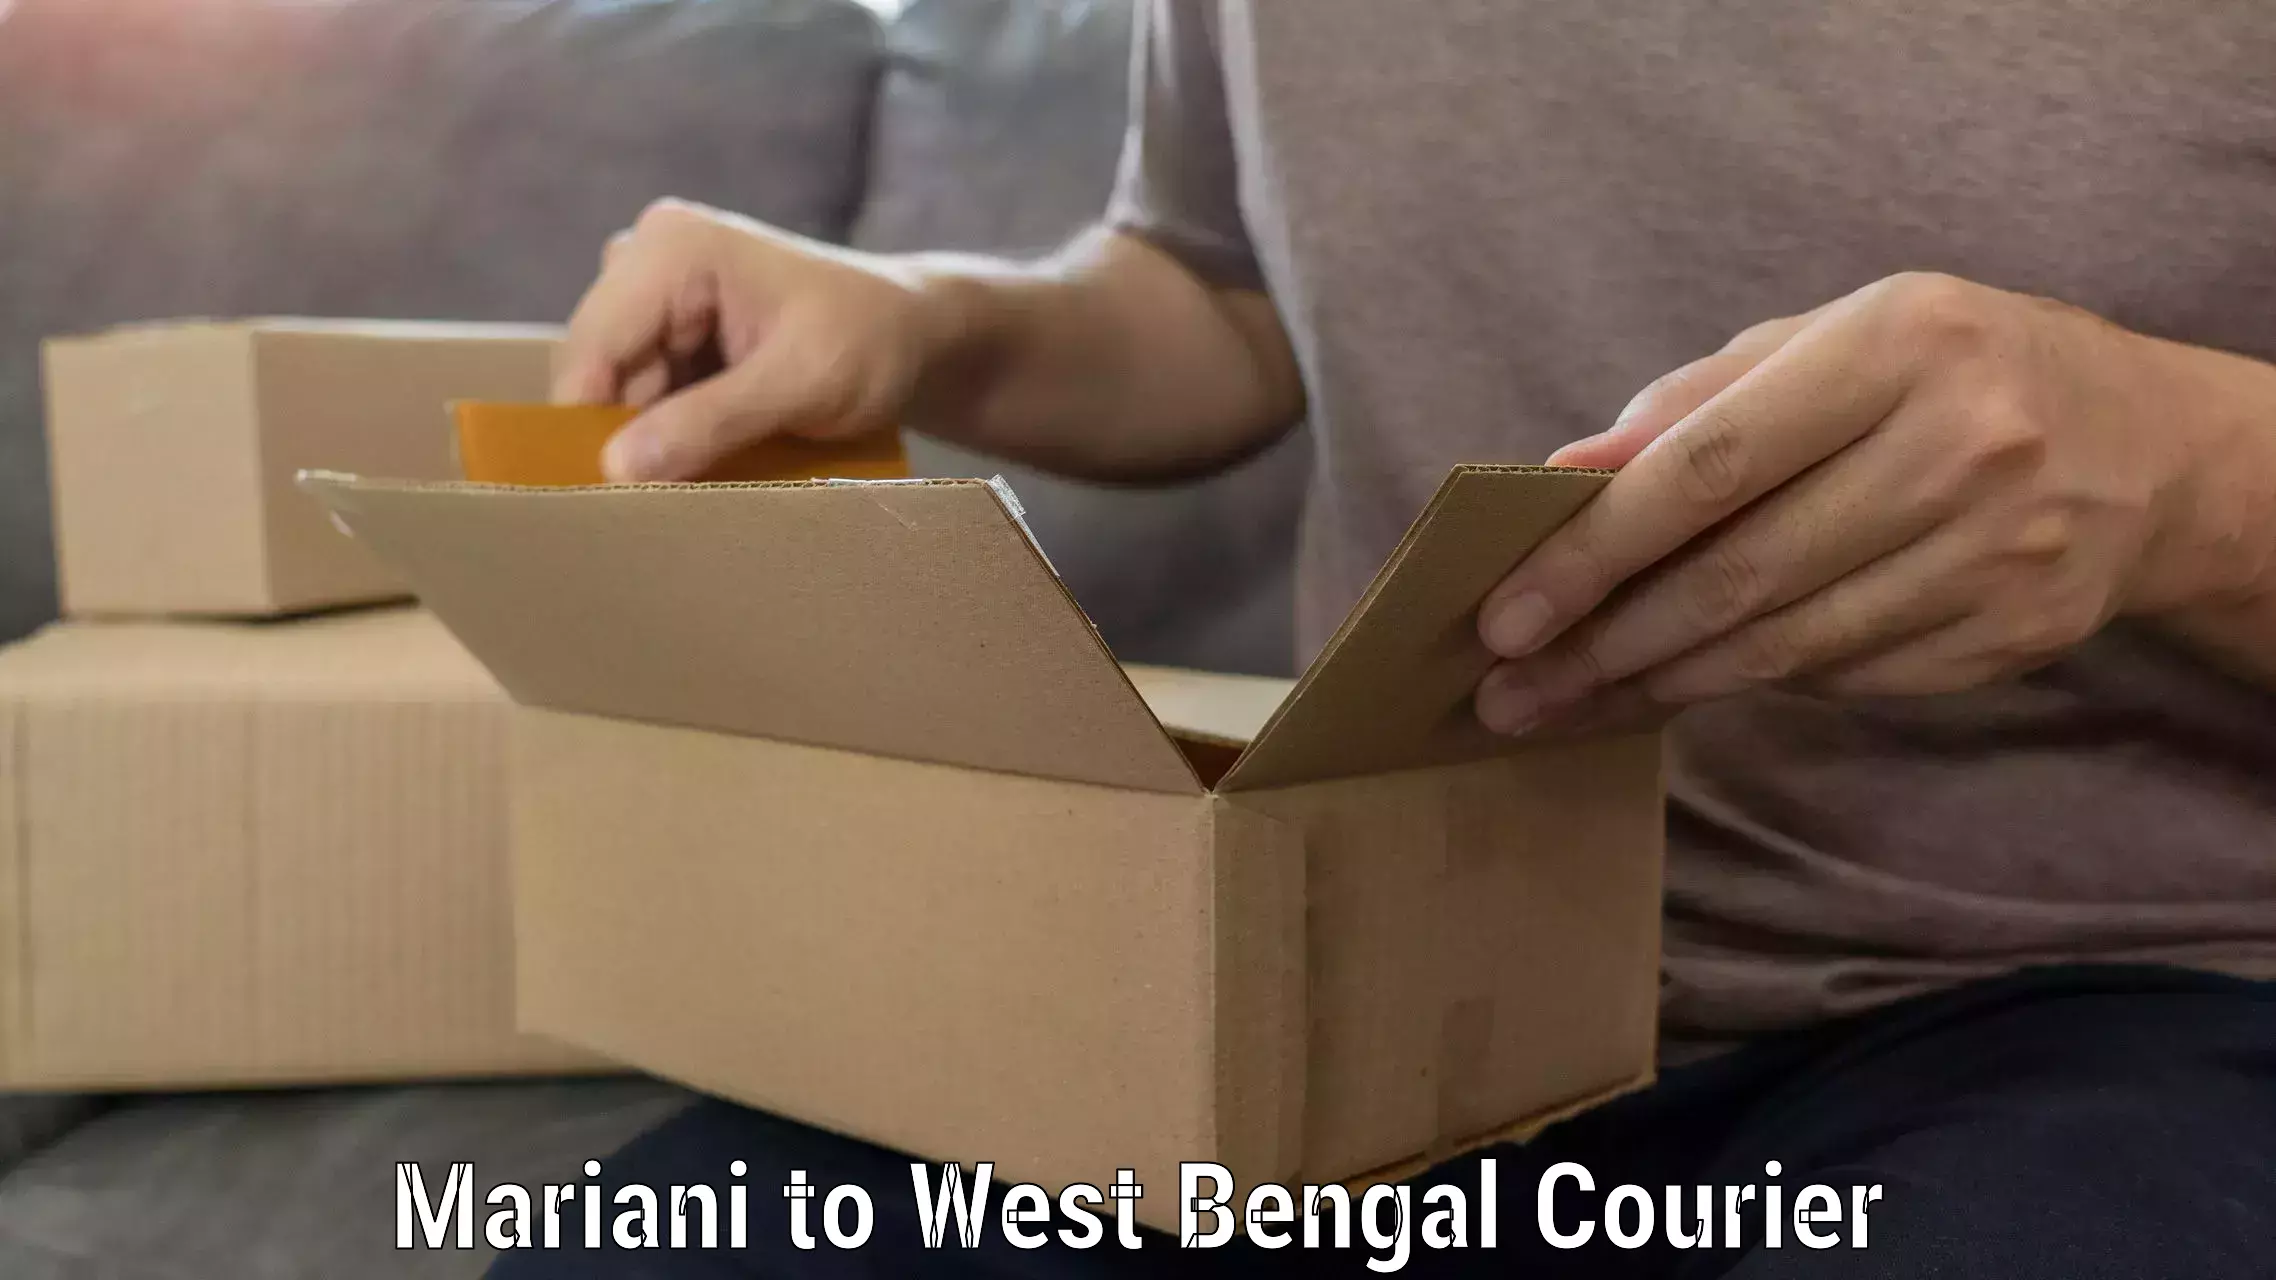 Furniture transport company Mariani to West Bengal